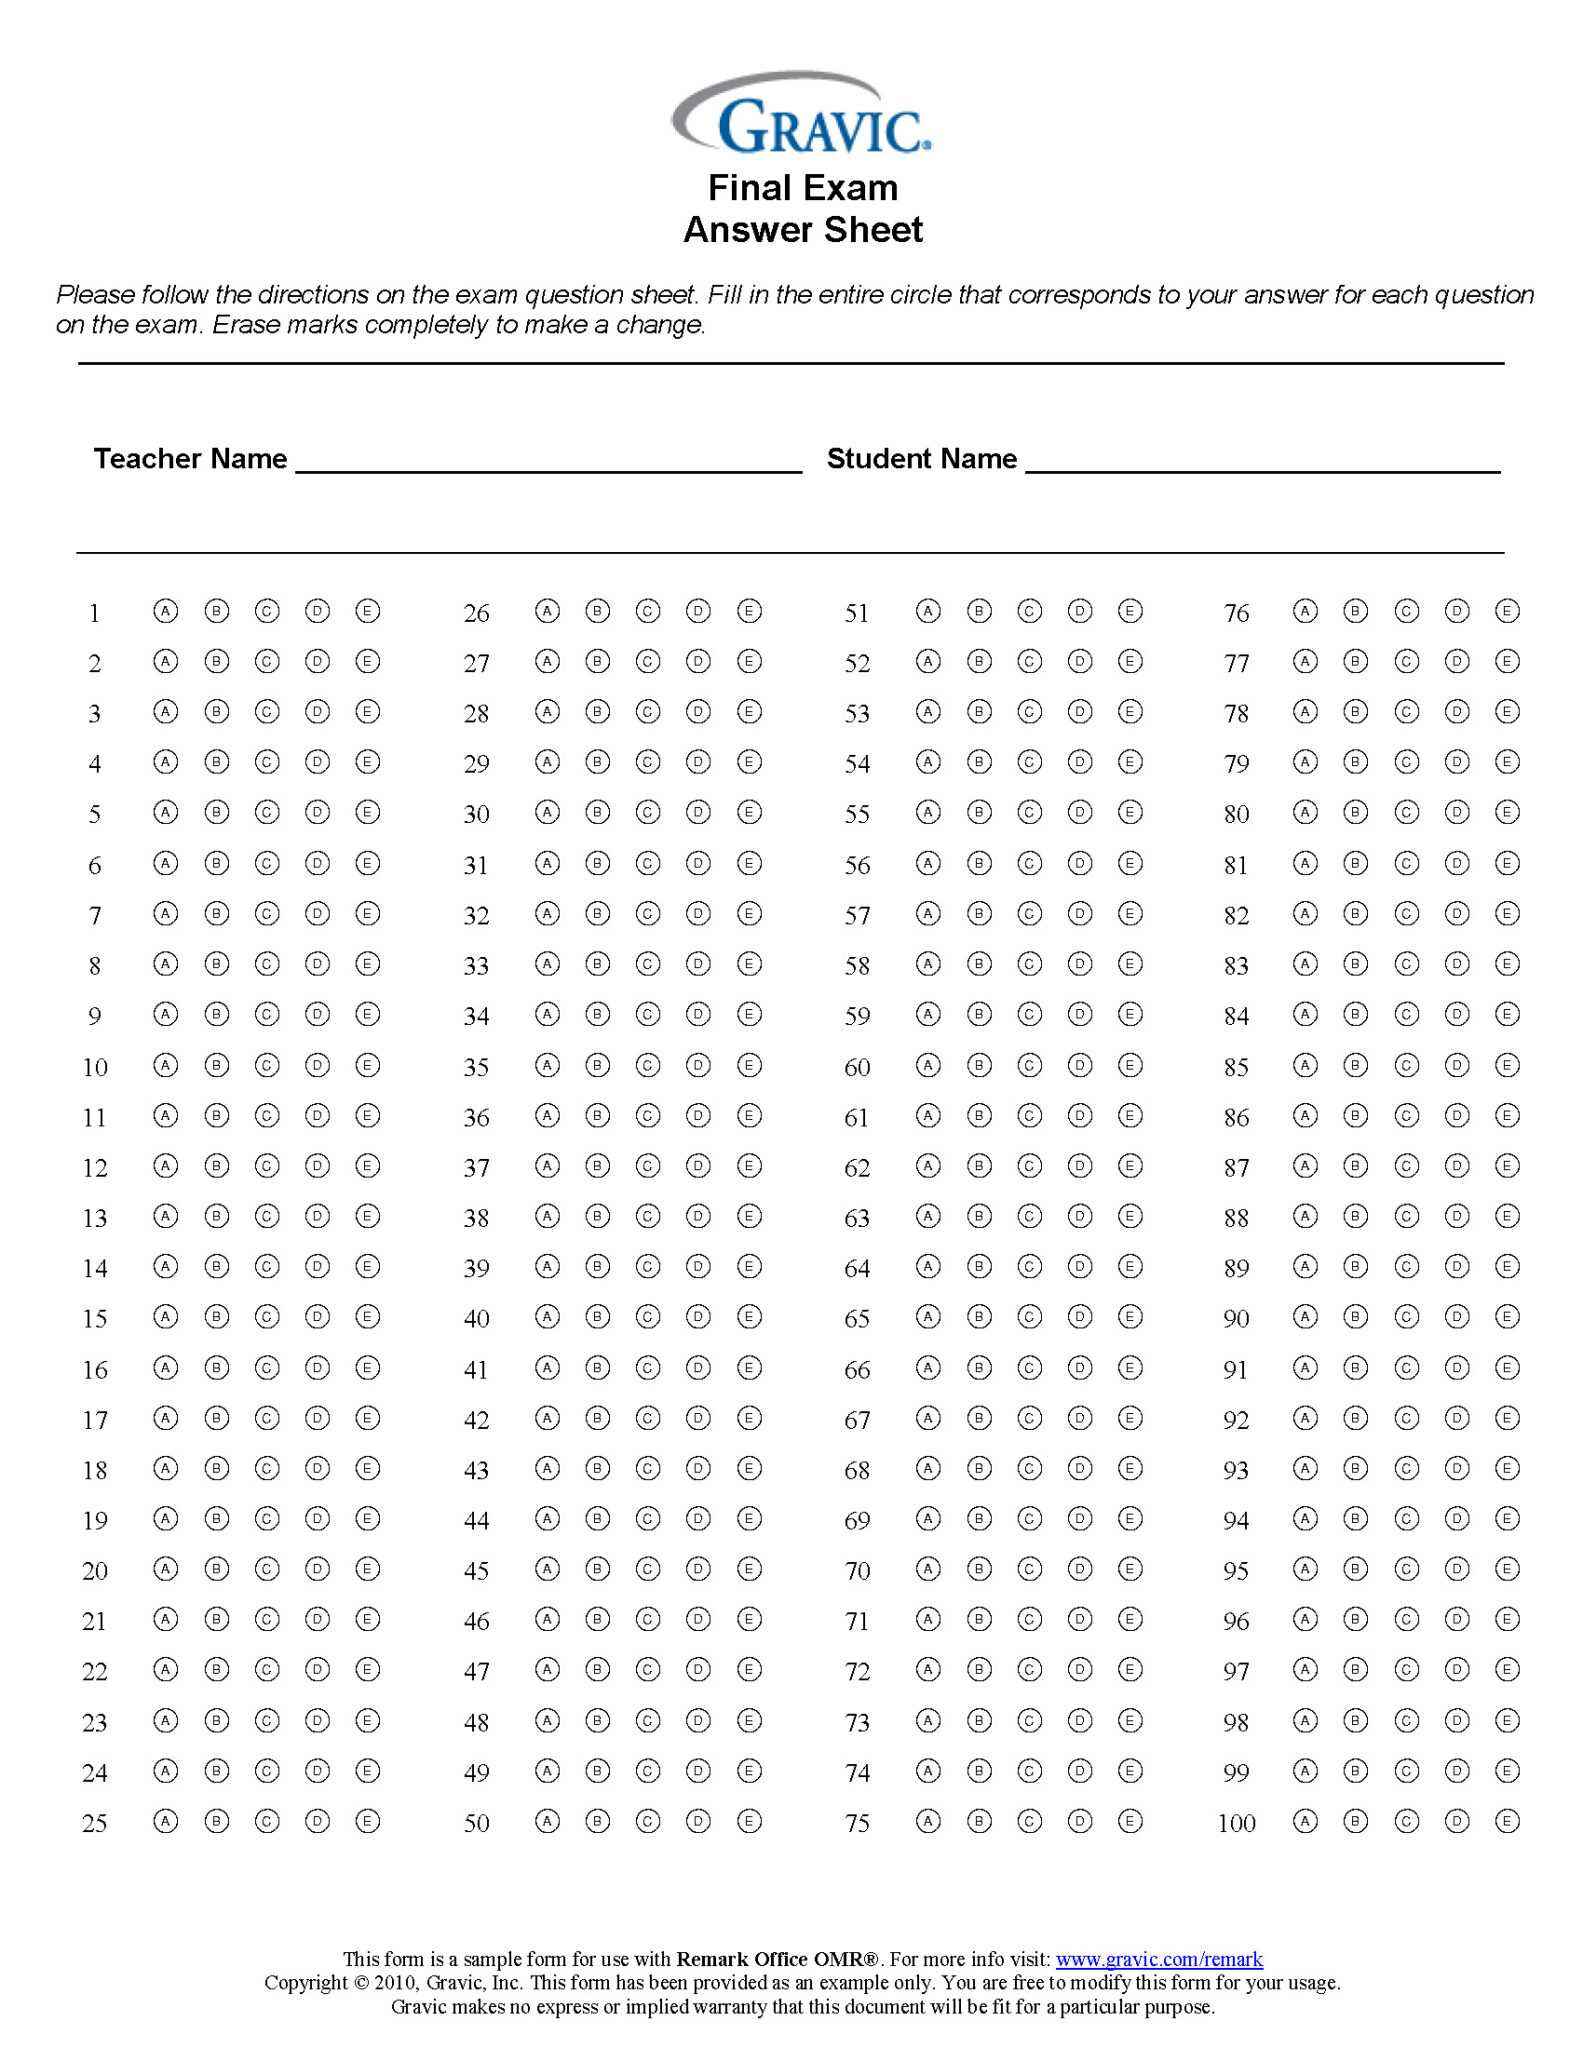 multiple-choice-answer-sheet-template-templates-at